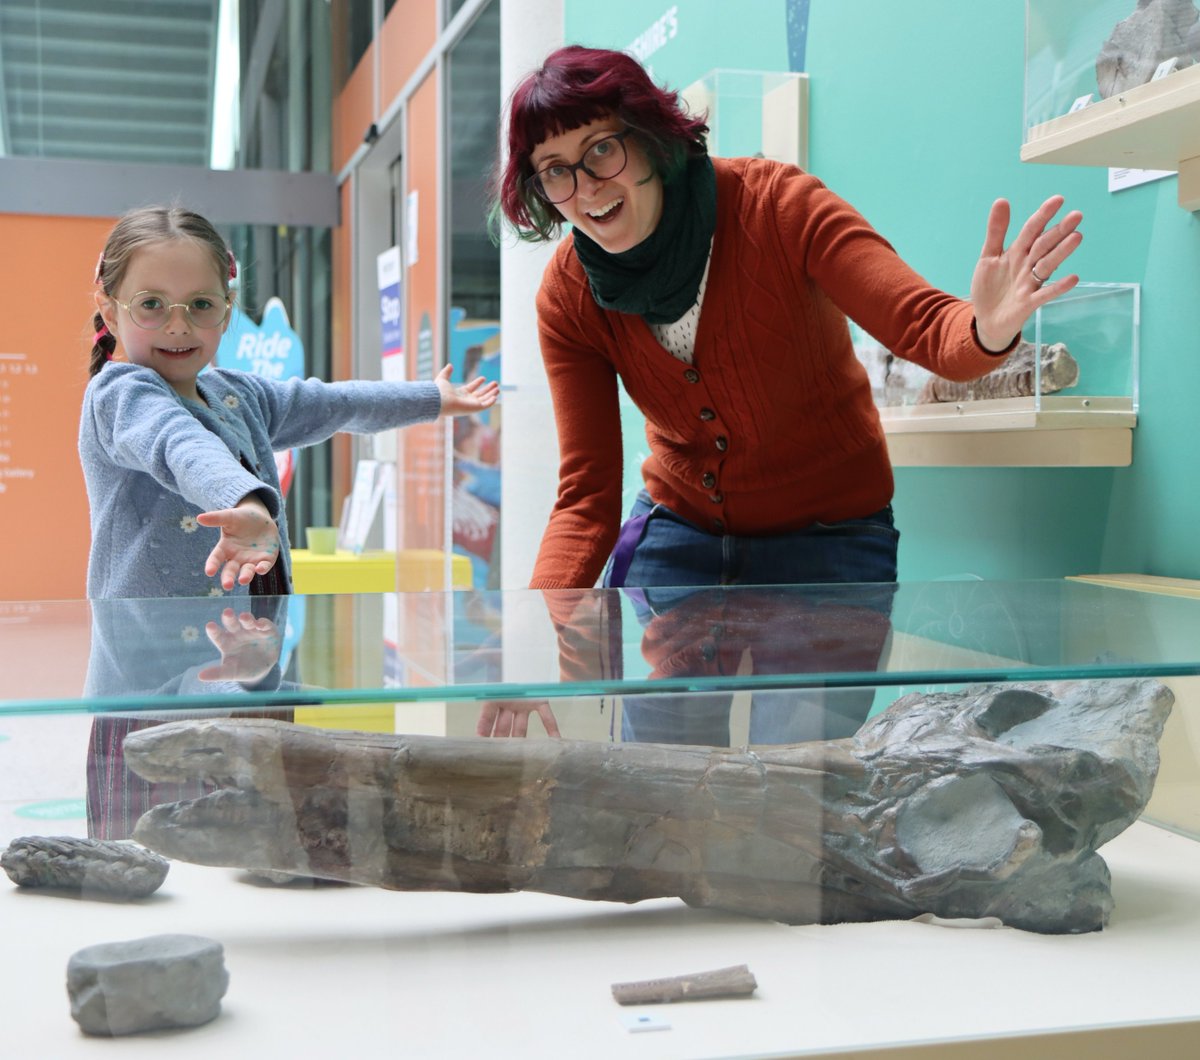 CONGRATULATIONS: @The_Herbert's prized Ichthyosaur skull named by six-year-old. Read more here 👉 tinyurl.com/3p8jy4az